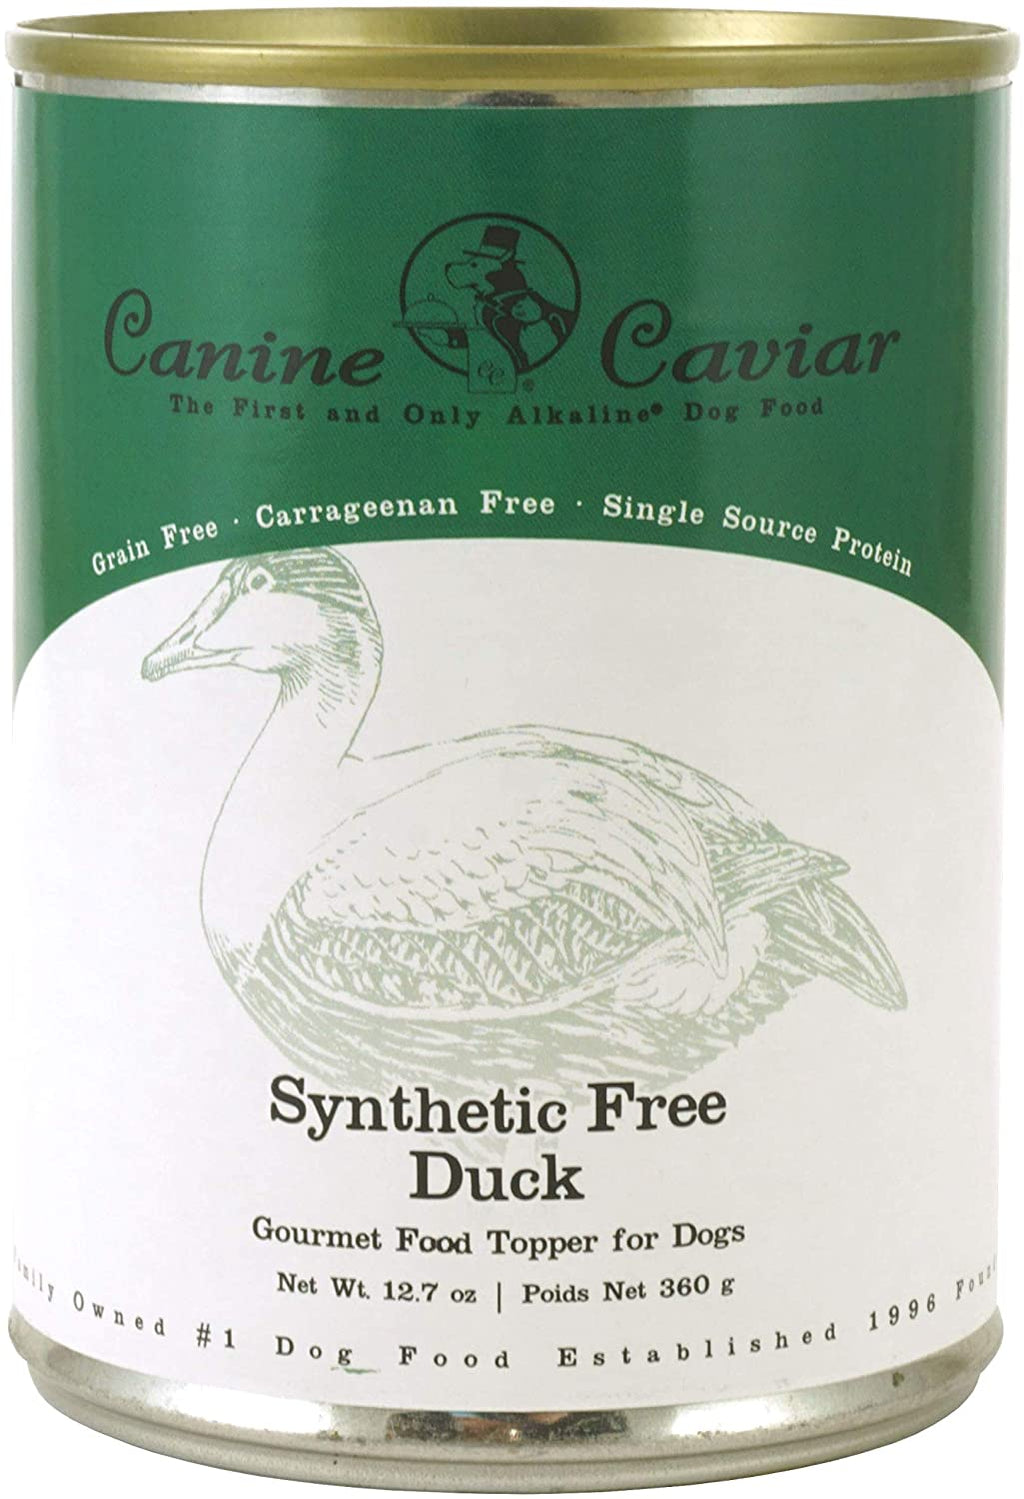 Canine Caviar Synthetic Free and Grain Free Duck Canned Dog Food - 12.7 oz - Case of 12  